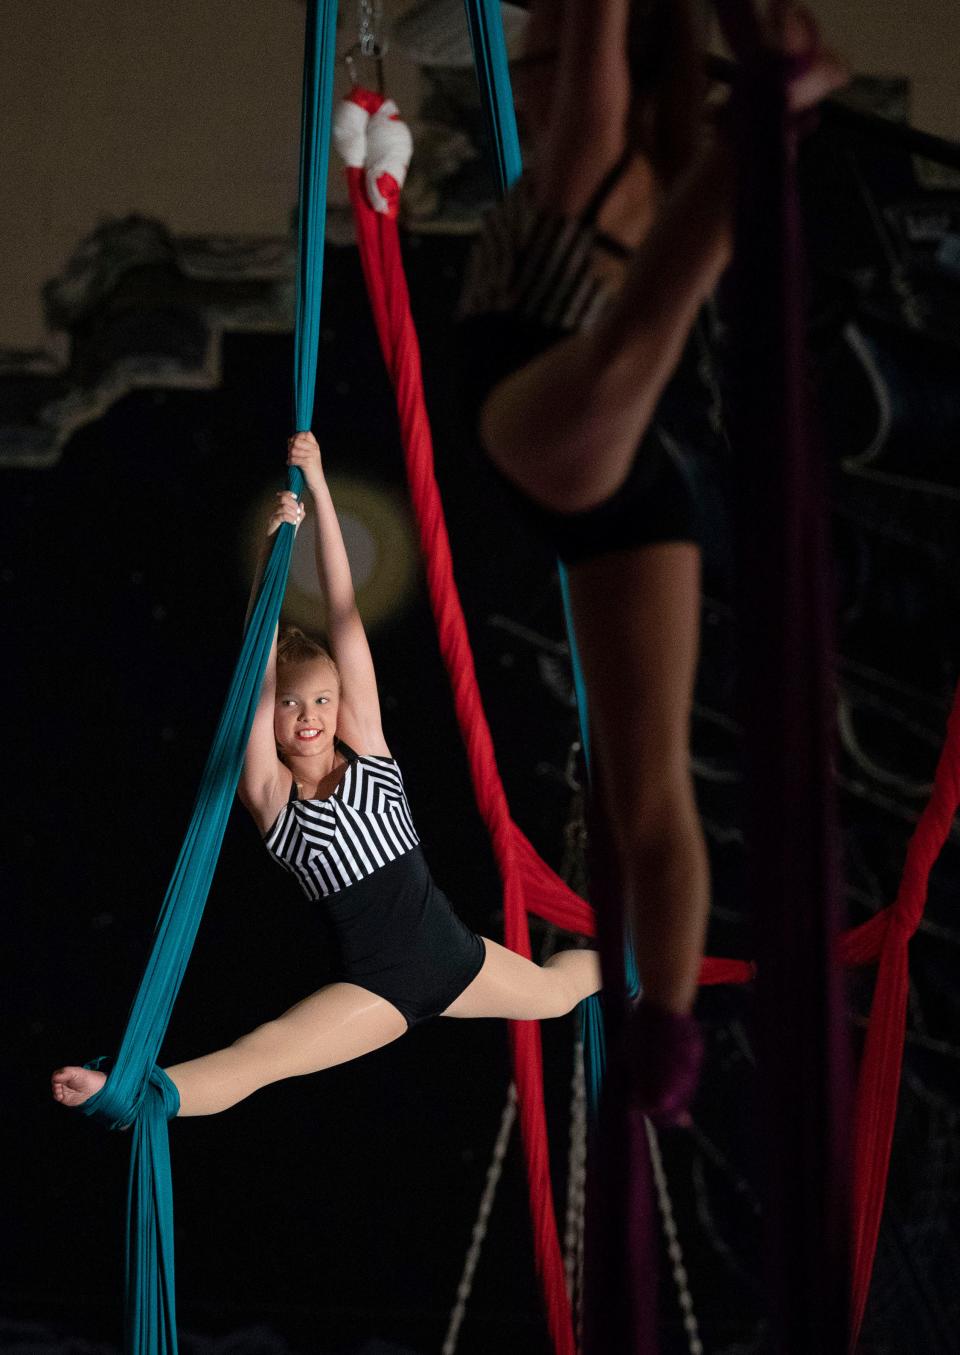 Circus camp teaches kids a variety of unique skills.